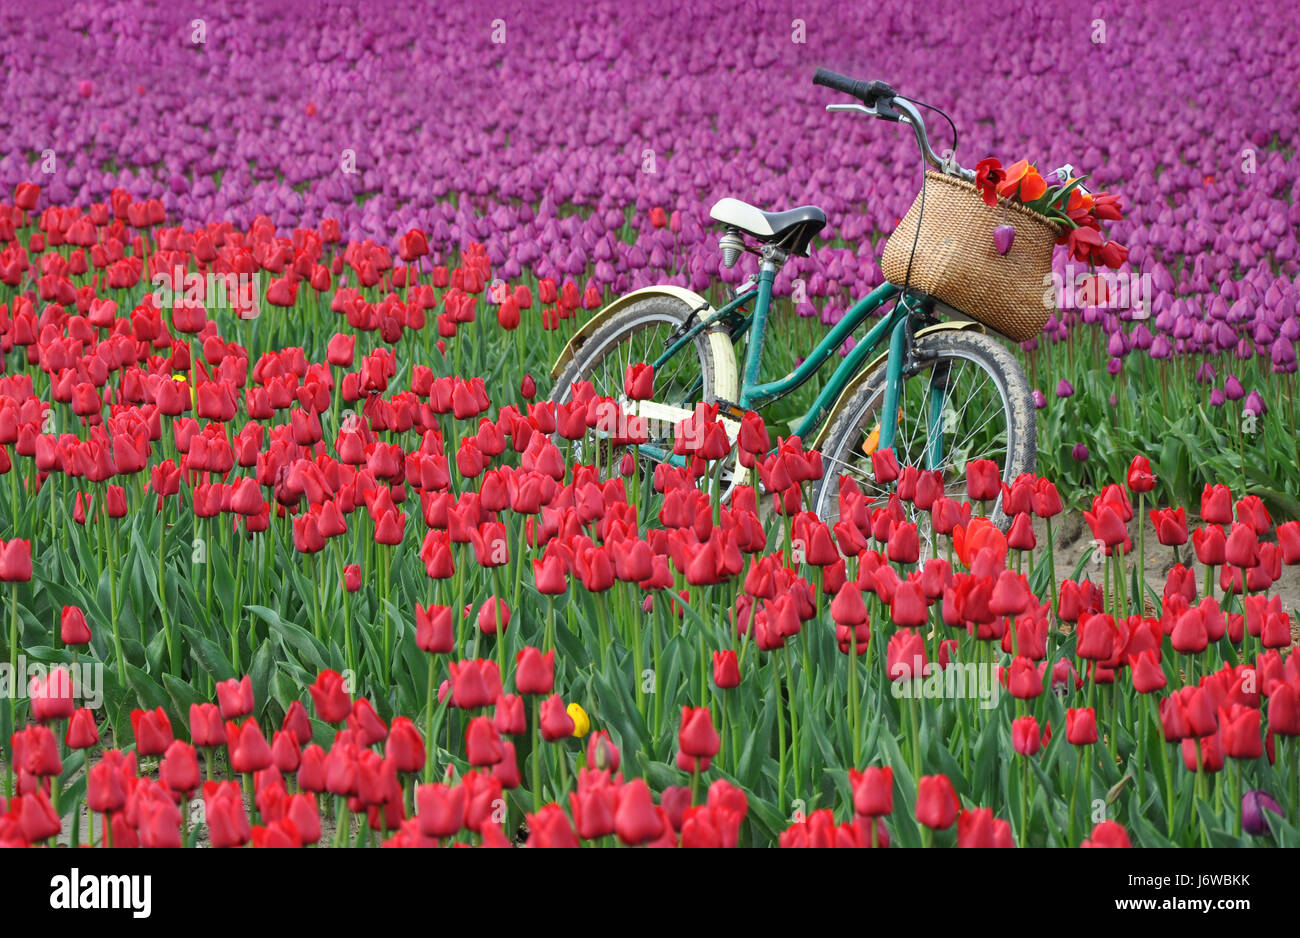 Old bicycle in colorful tulips field Stock Photo